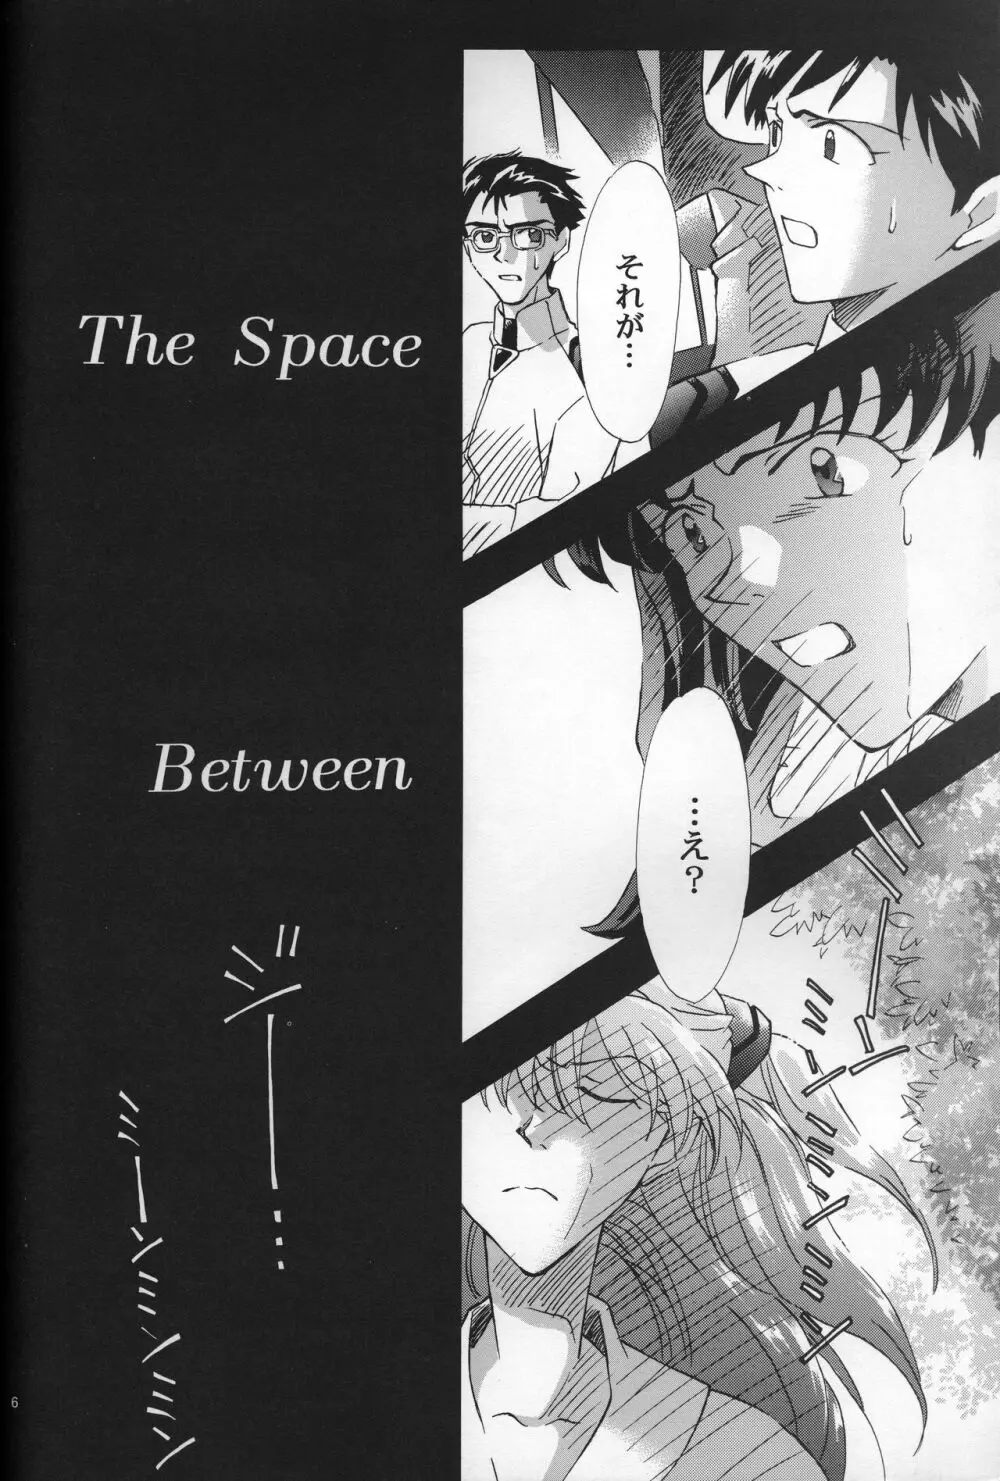 AVALON Lost Episode 0:3 The Space Between 7ページ